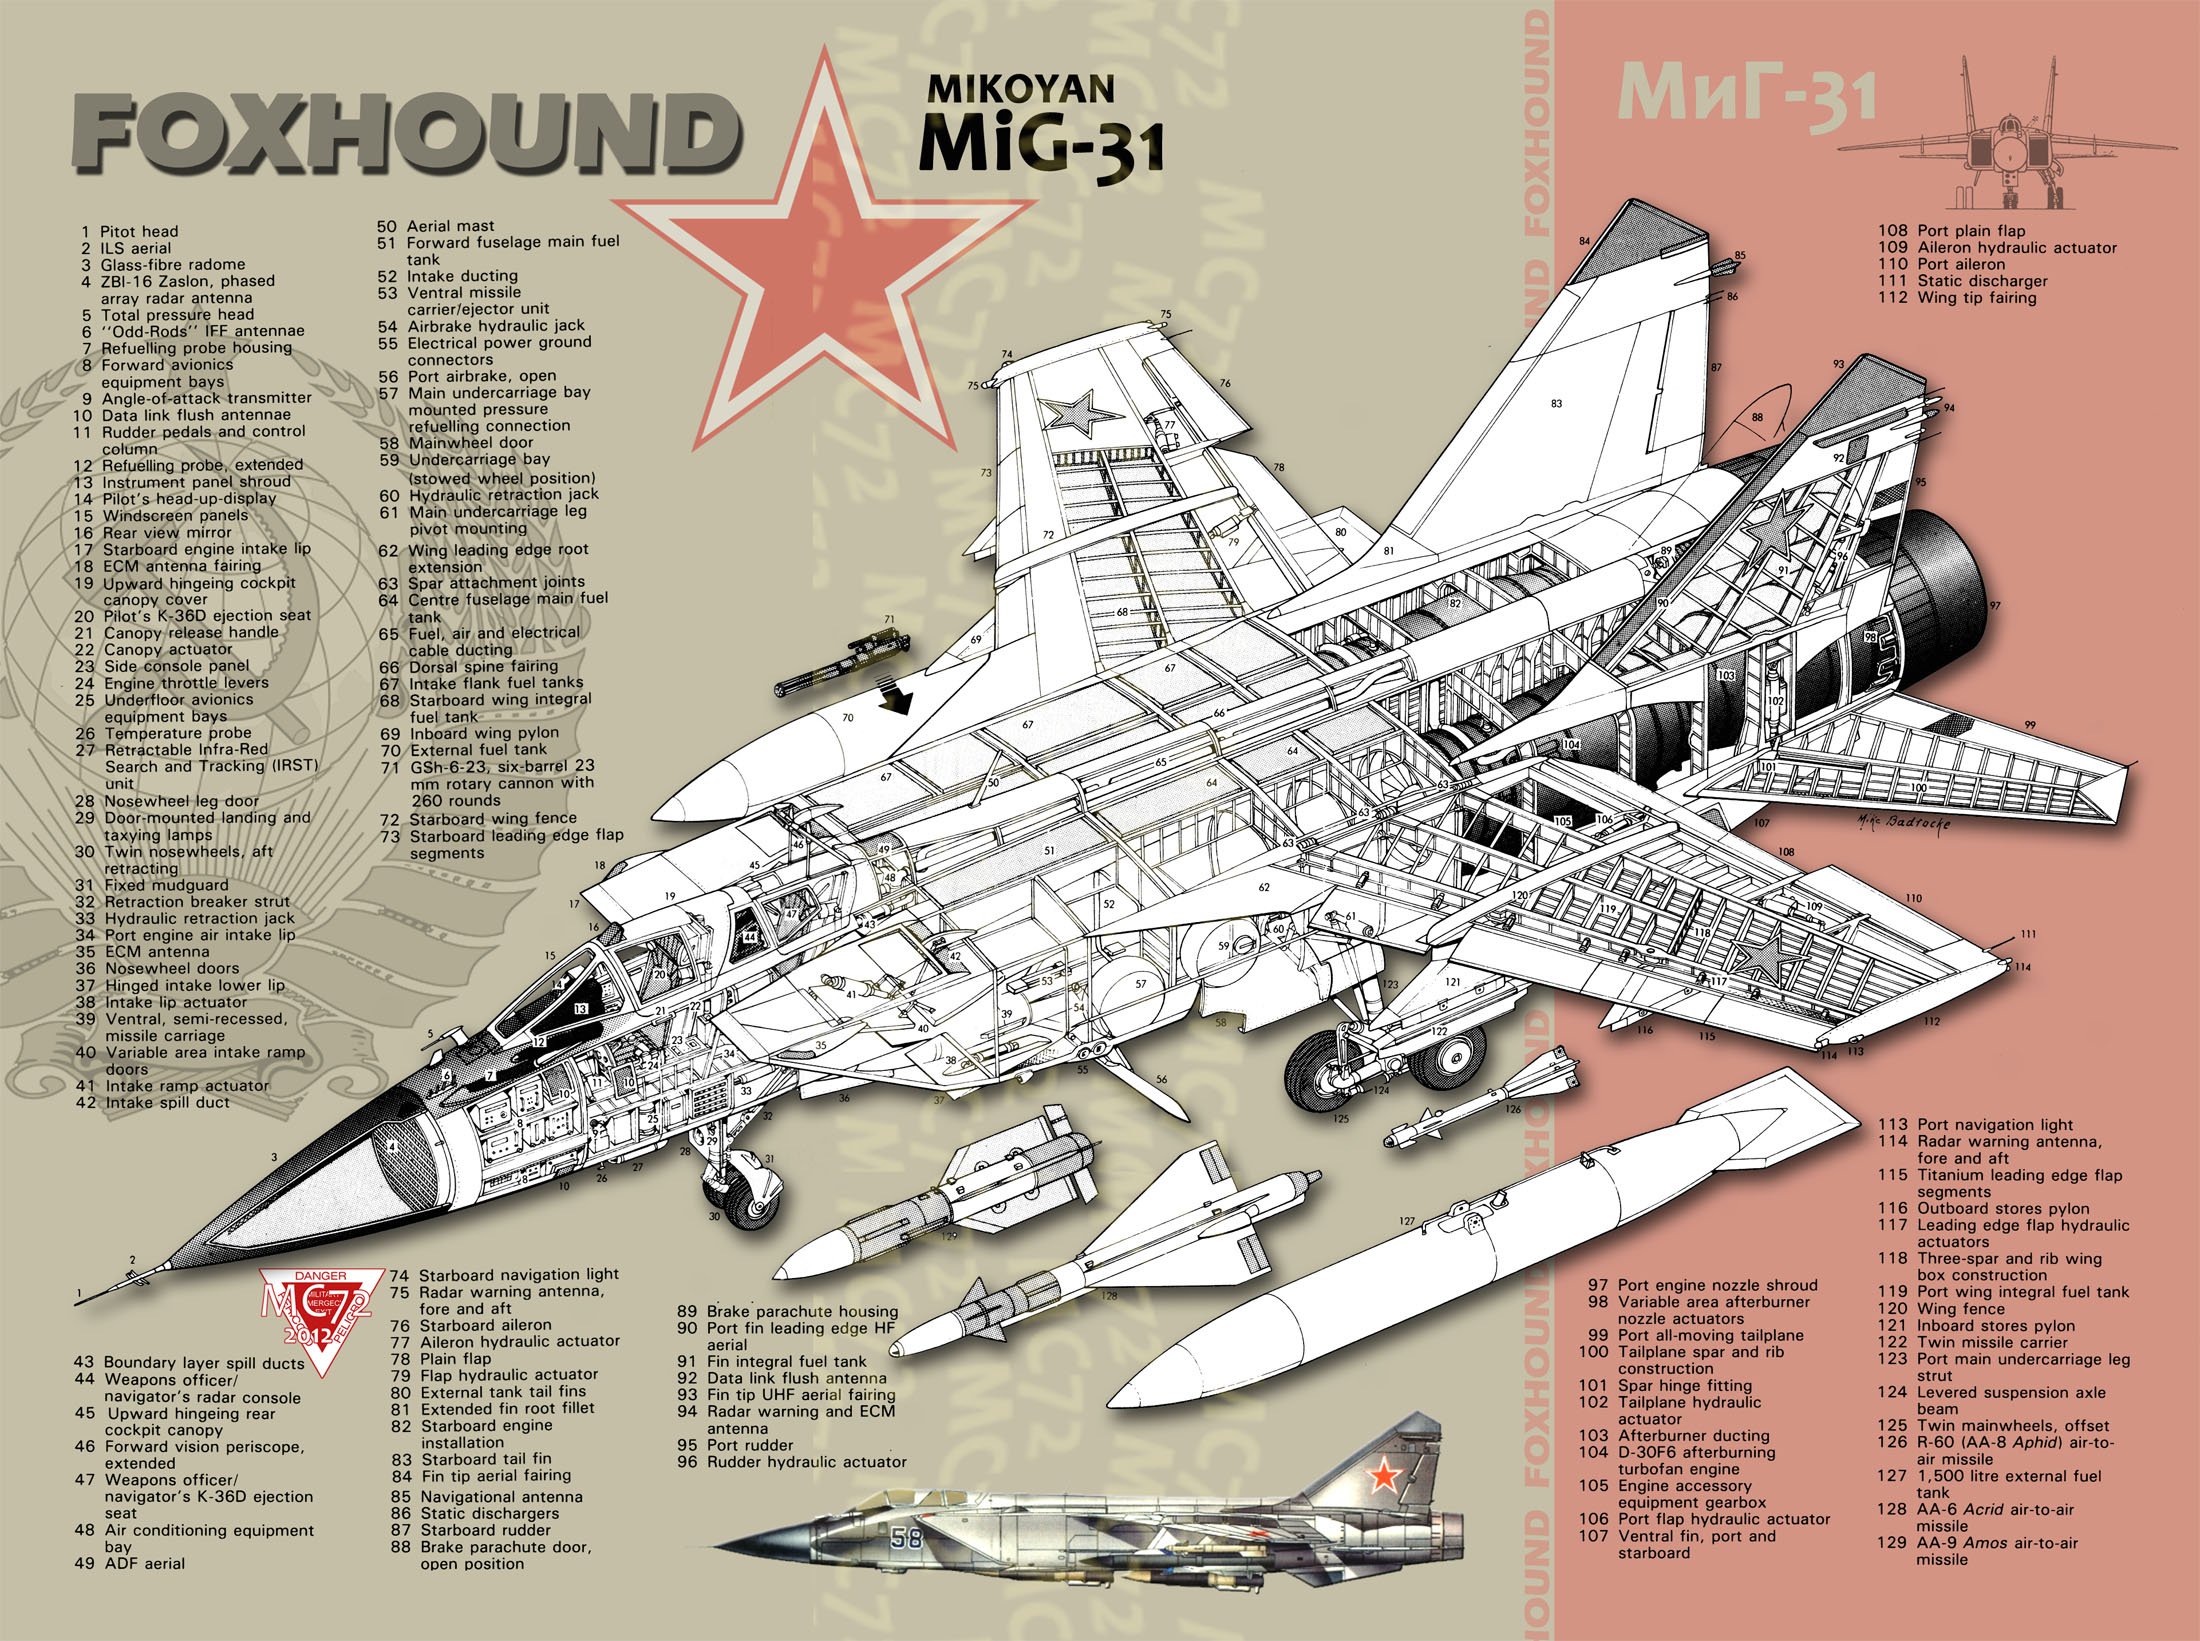 mig 31, Fighter, Jet, Military, Airplane, Plane, Russian, Mig,  3 Wallpaper